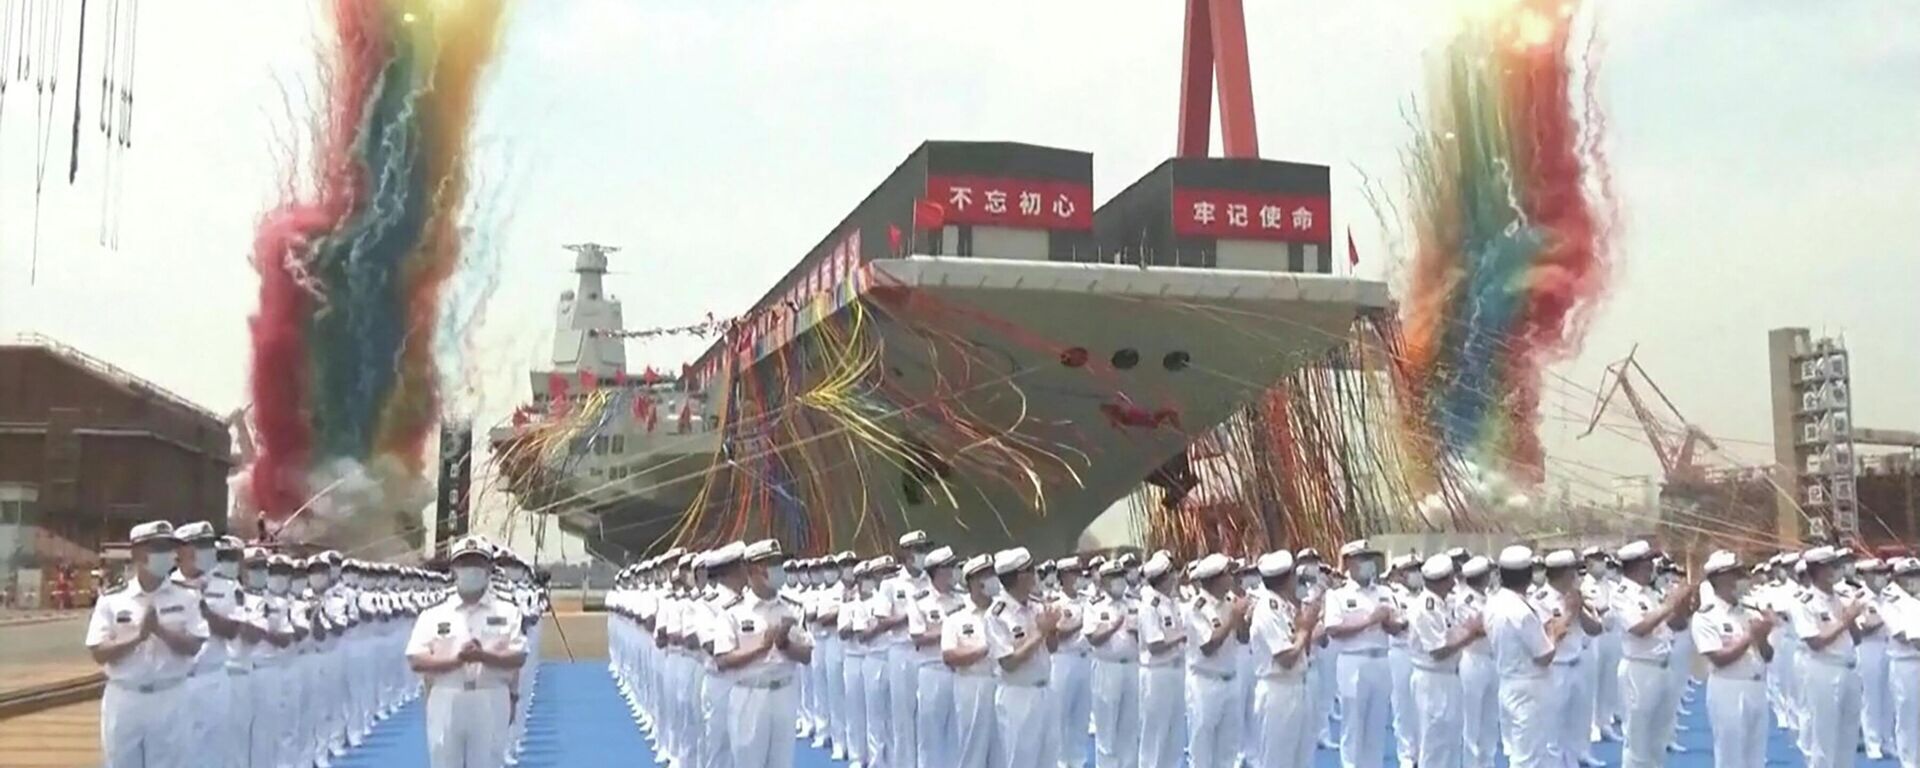 This screen grab made from video released by Chinese state broadcaster CCTV shows the launch ceremony of the Fujian, a People's Liberation Army (PLA) aircraft carrier, at a shipyard in Shanghai on June 17, 2022 - Sputnik International, 1920, 17.06.2022